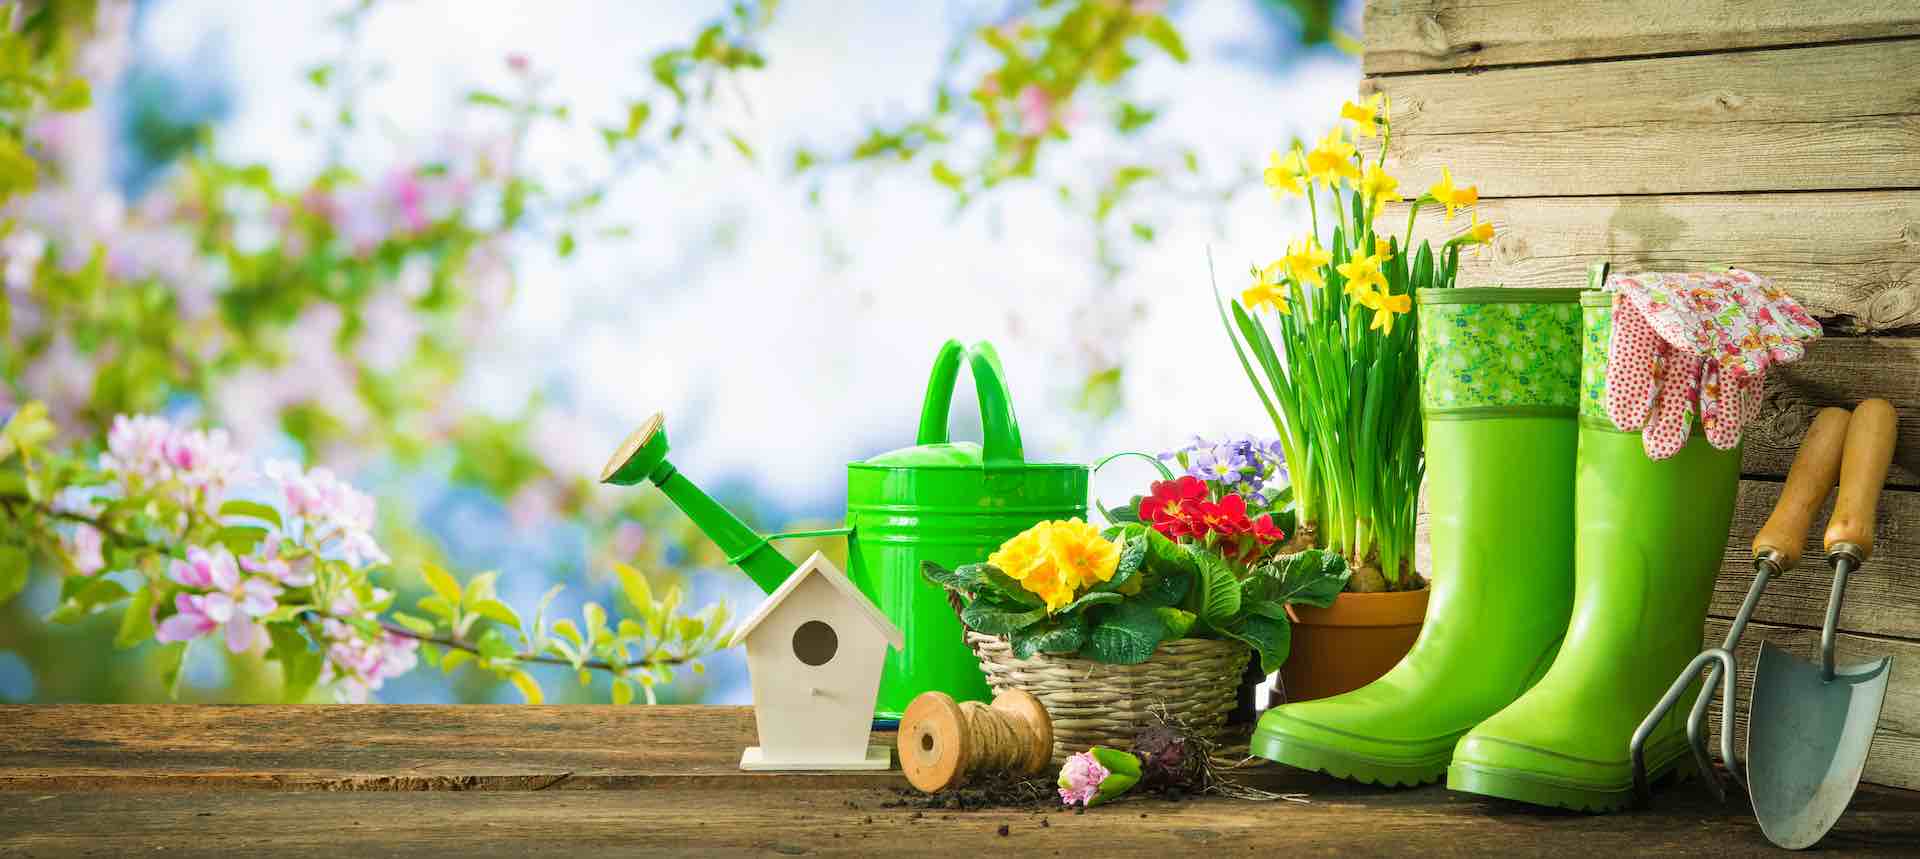 Gardening tools and spring flowers on the terrace | In The Bag ...